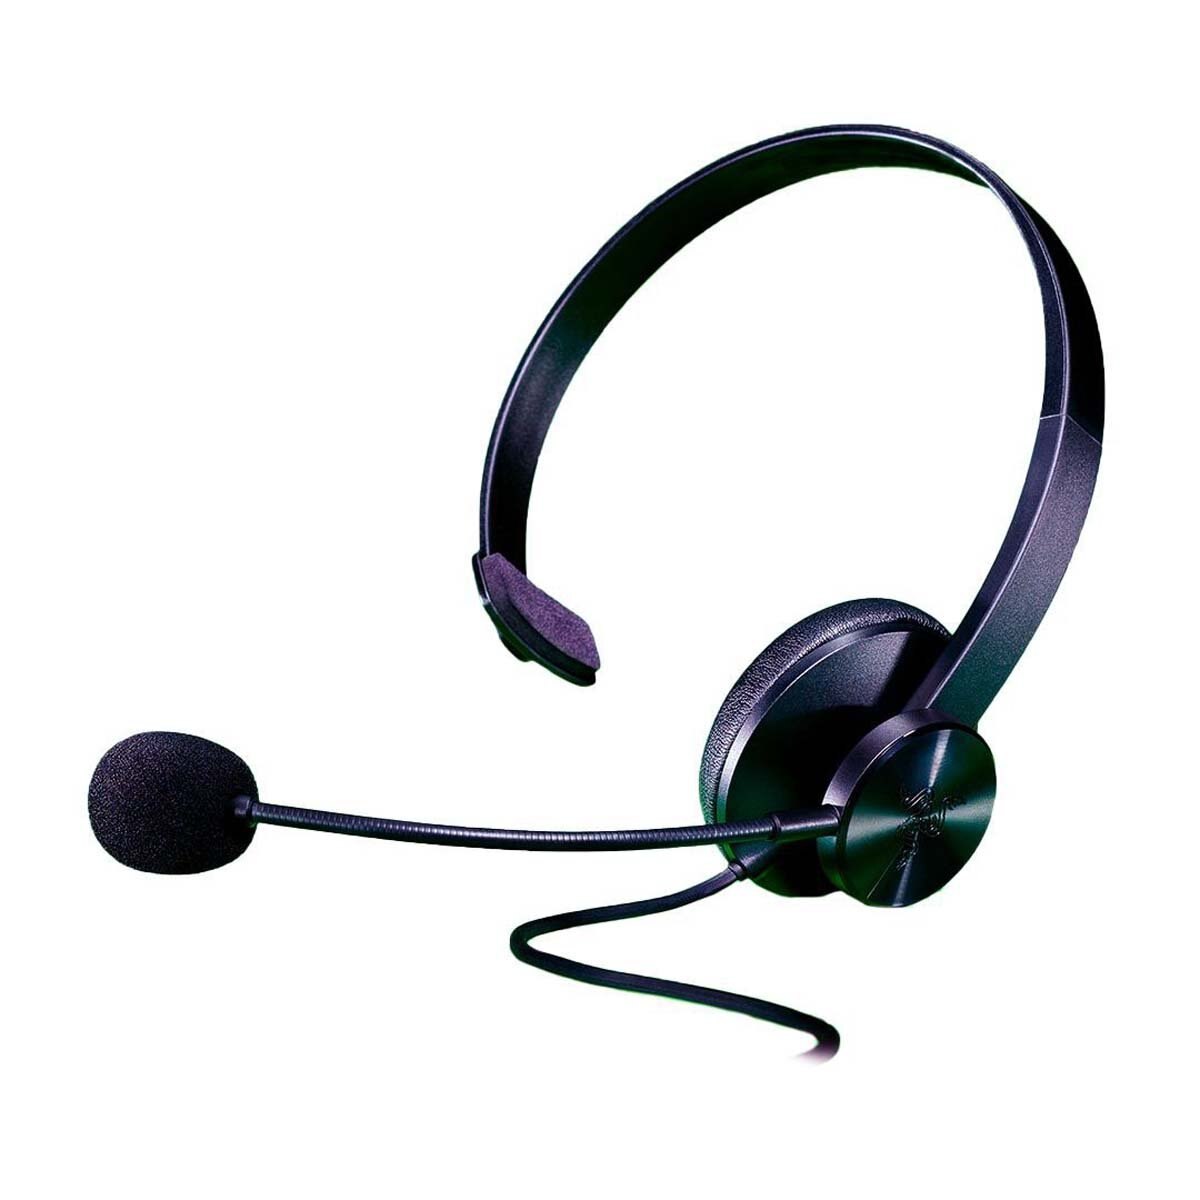 Headset Razer Tetra Wired Console Chat